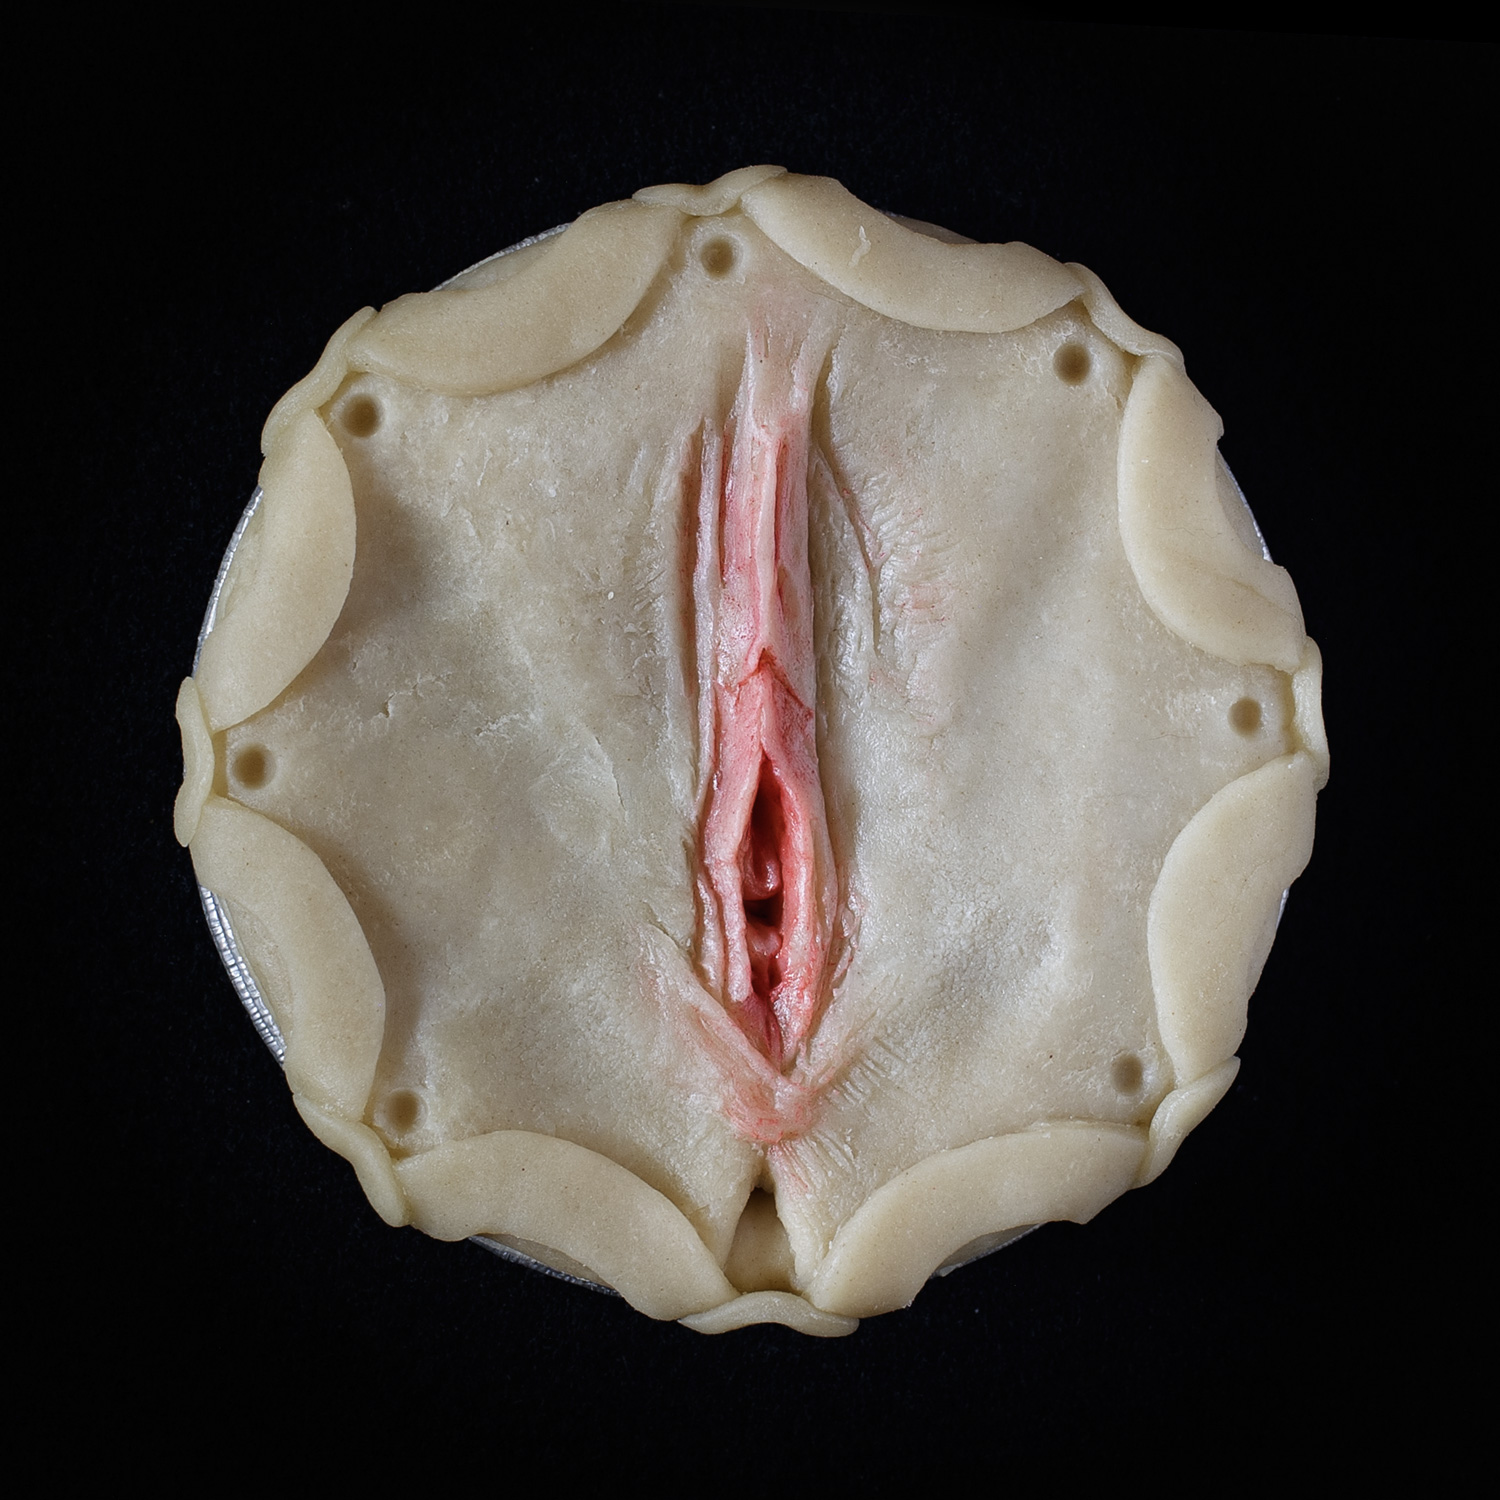 Unbaked Blueberry Pie with pie crust art made that looks like a pink vulva. 